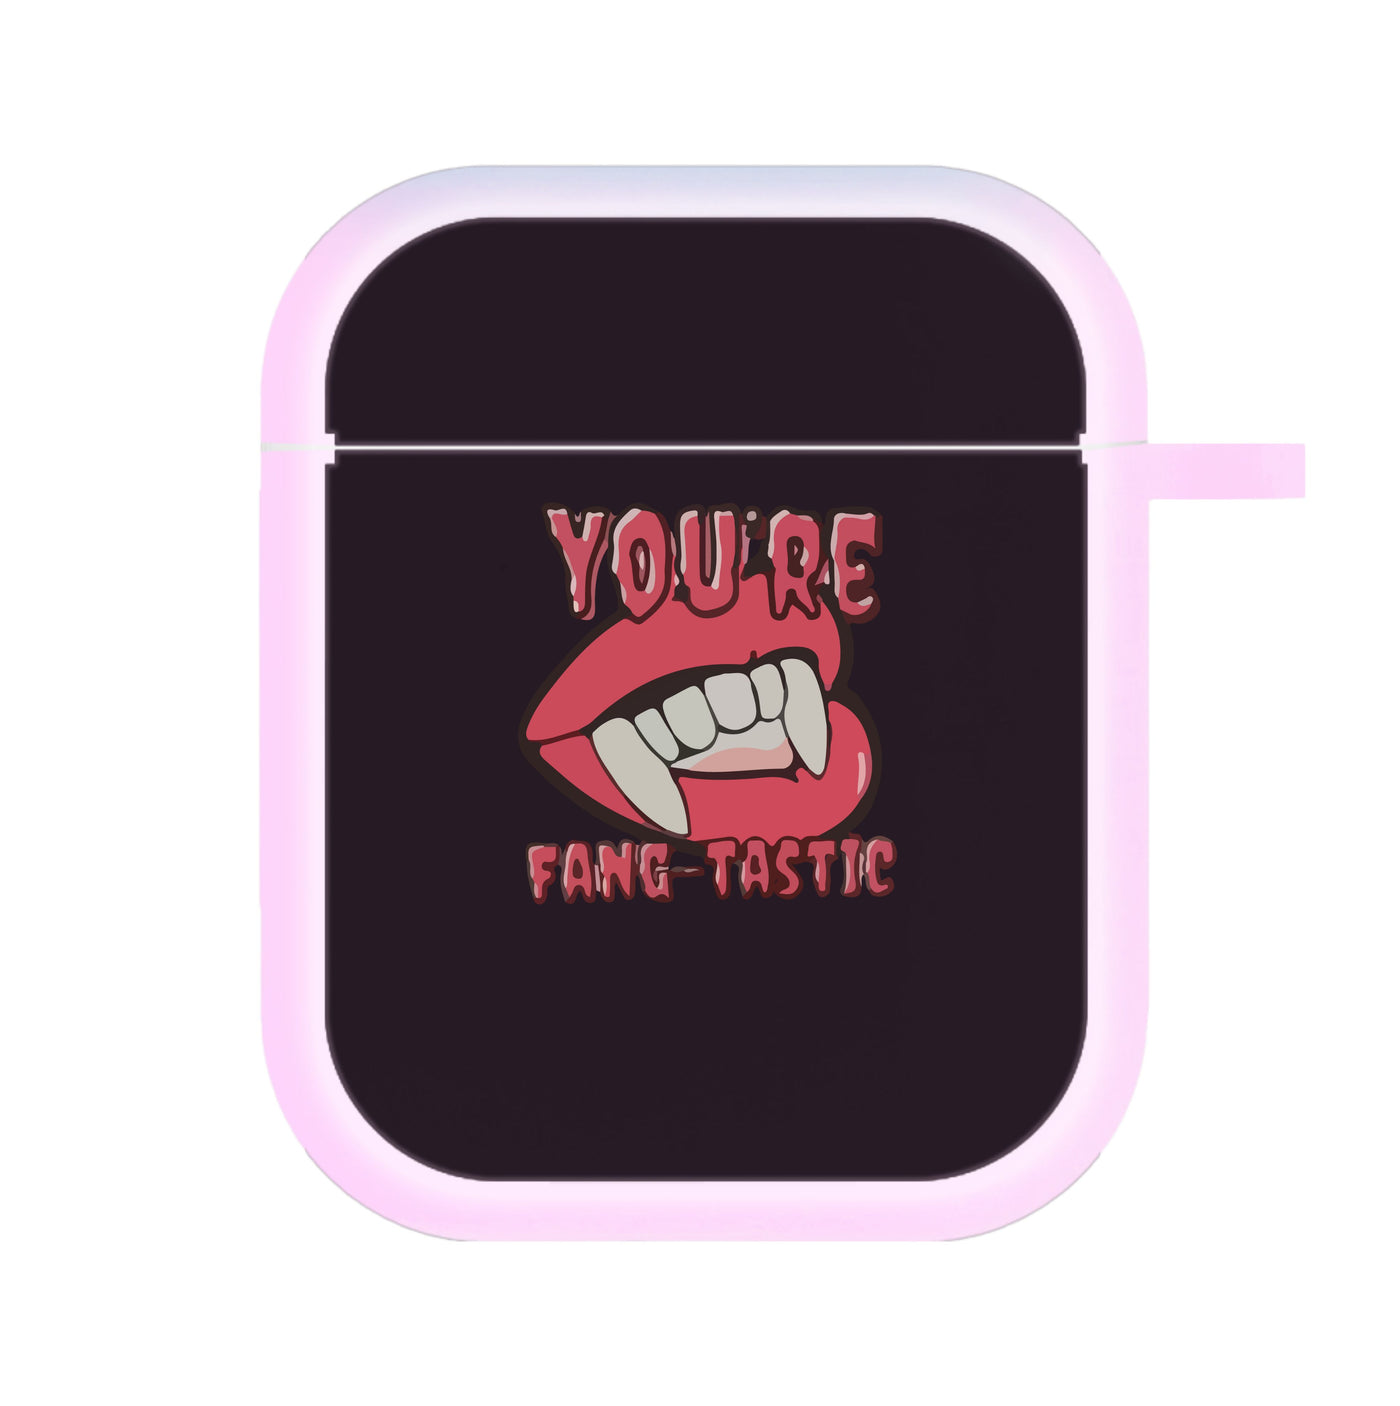 You're Fang-Tastic - Halloween AirPods Case